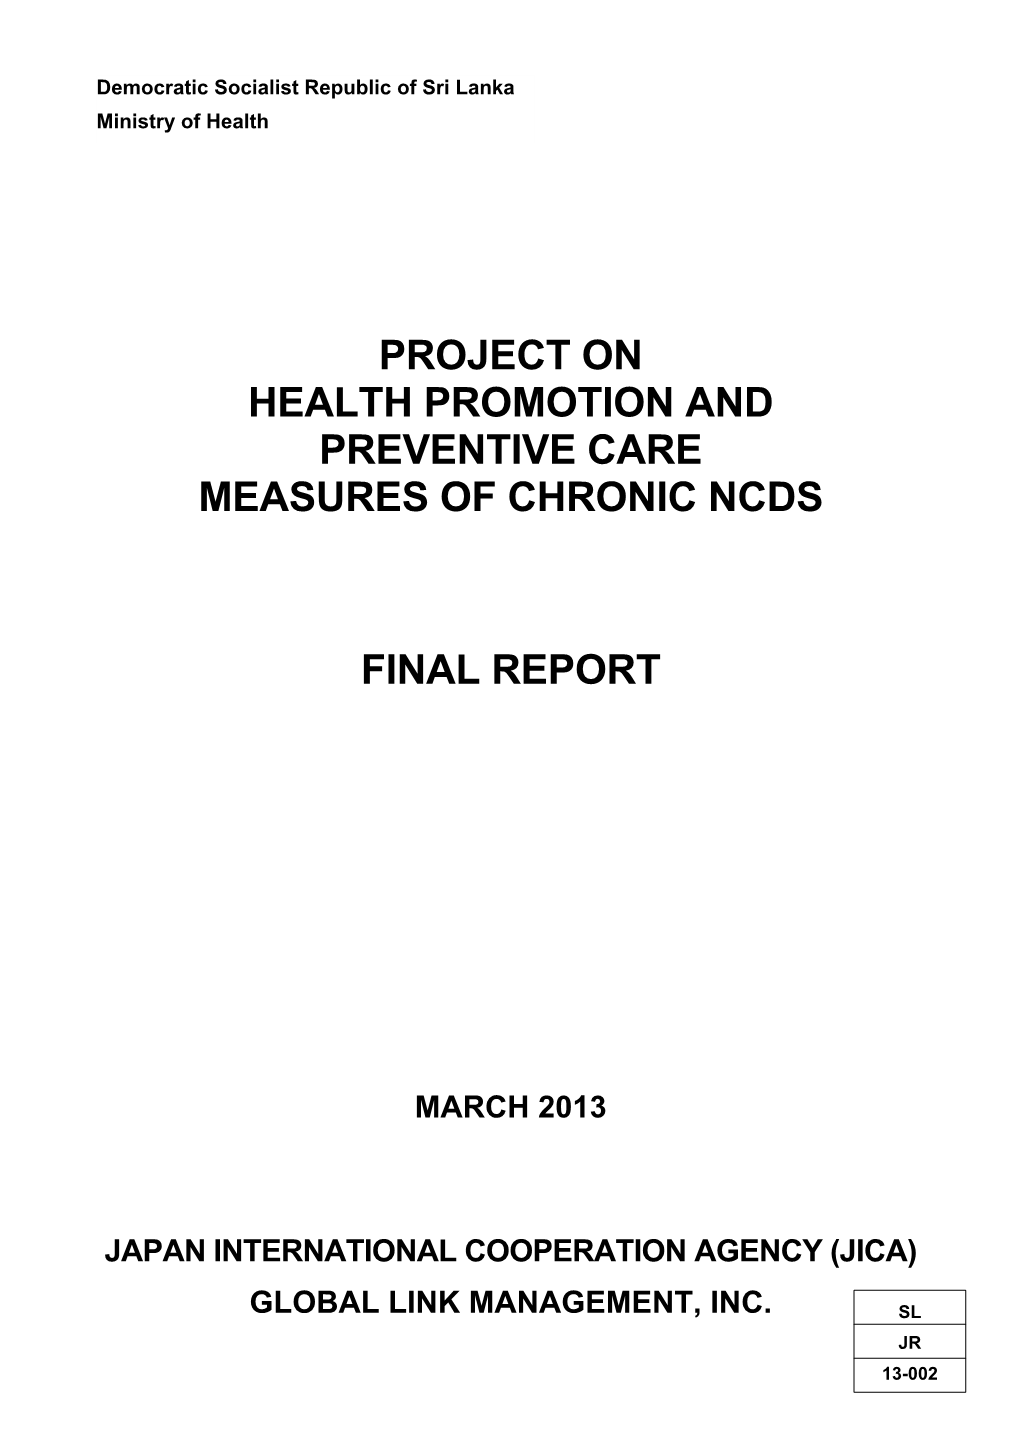 Project on Health Promotion and Preventive Care Measures of Chronic Ncds